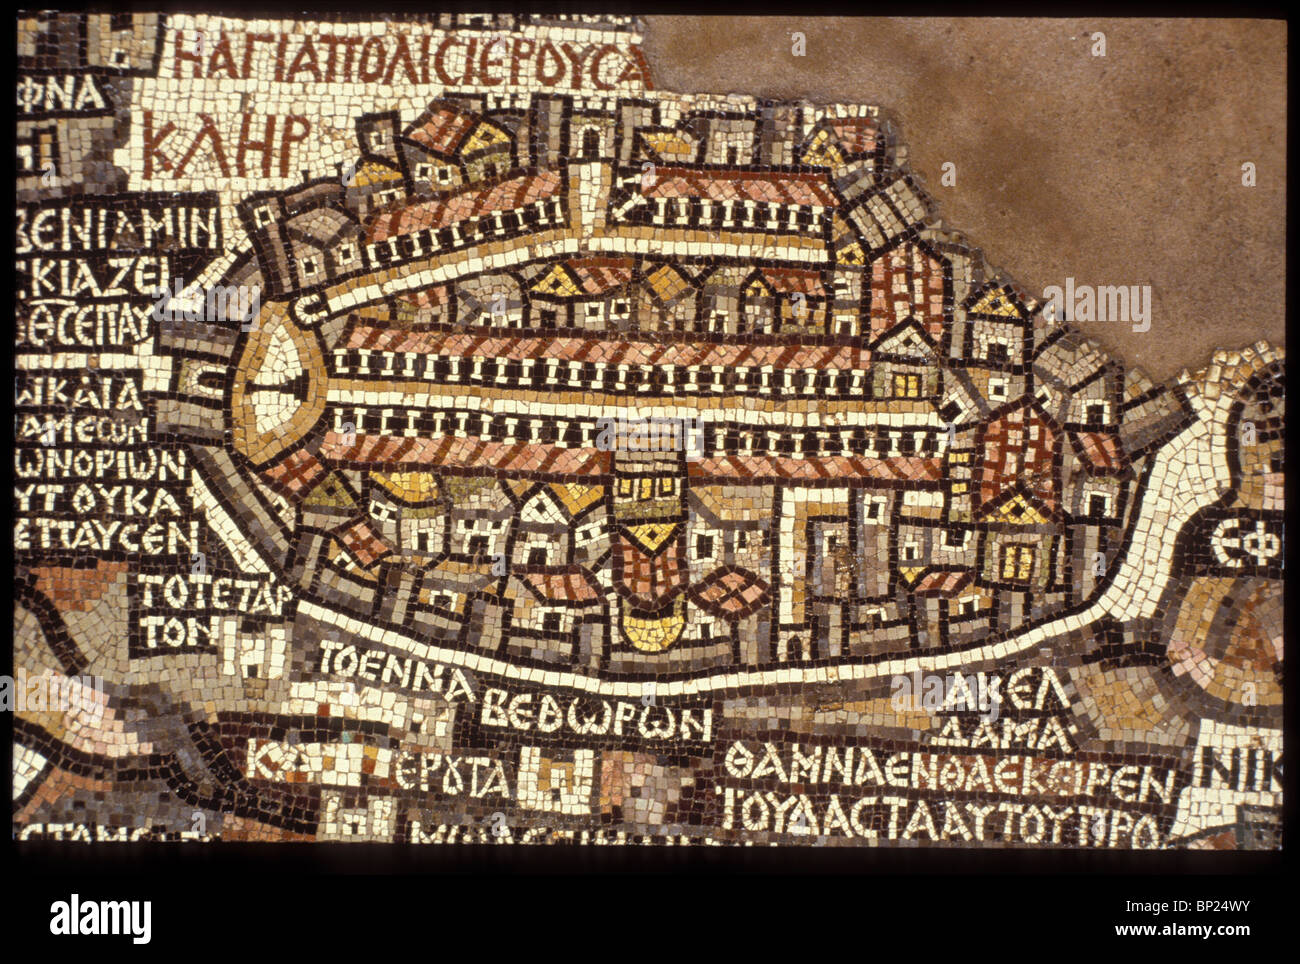 DETAIL OF THE MOSAIC FLOOR OF THE 5TH. C. AD CHURCH AT MADABA (TRANS JORDAN), SHOWING DETAILED MAP OF JERUSALEM AT THAT TIME. Stock Photo